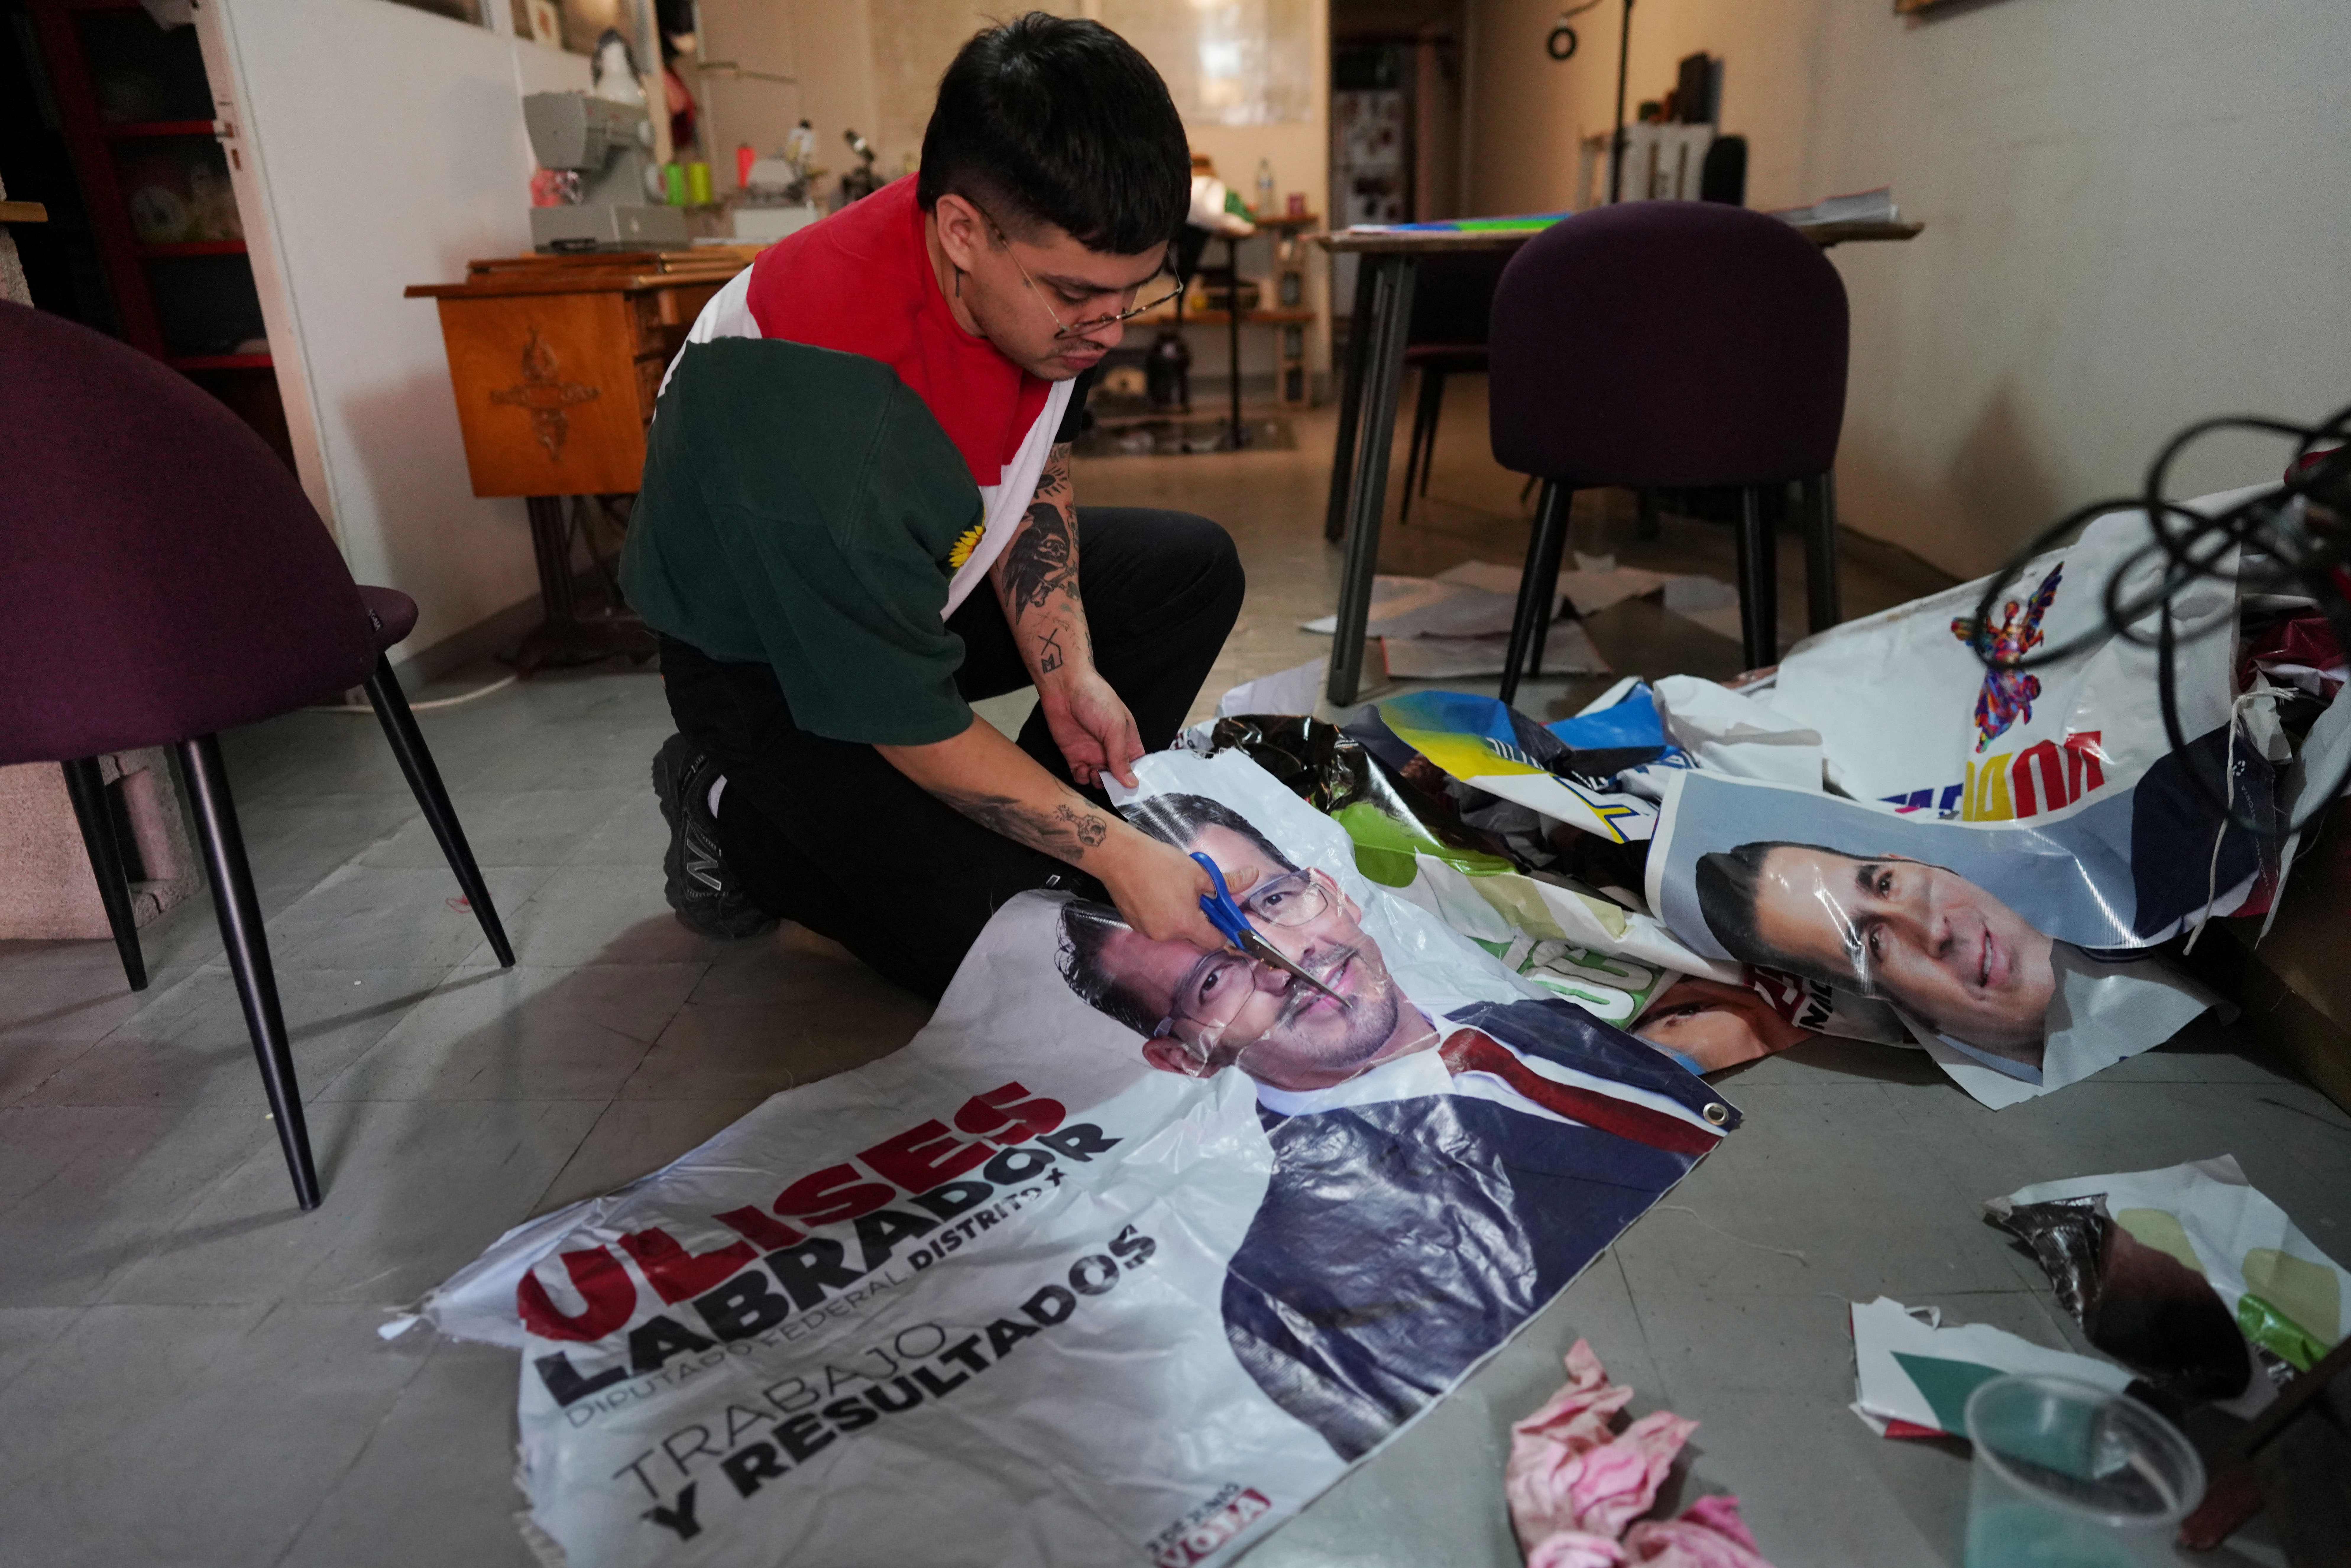 Mexican fashion designer recycles election ads into tote bags